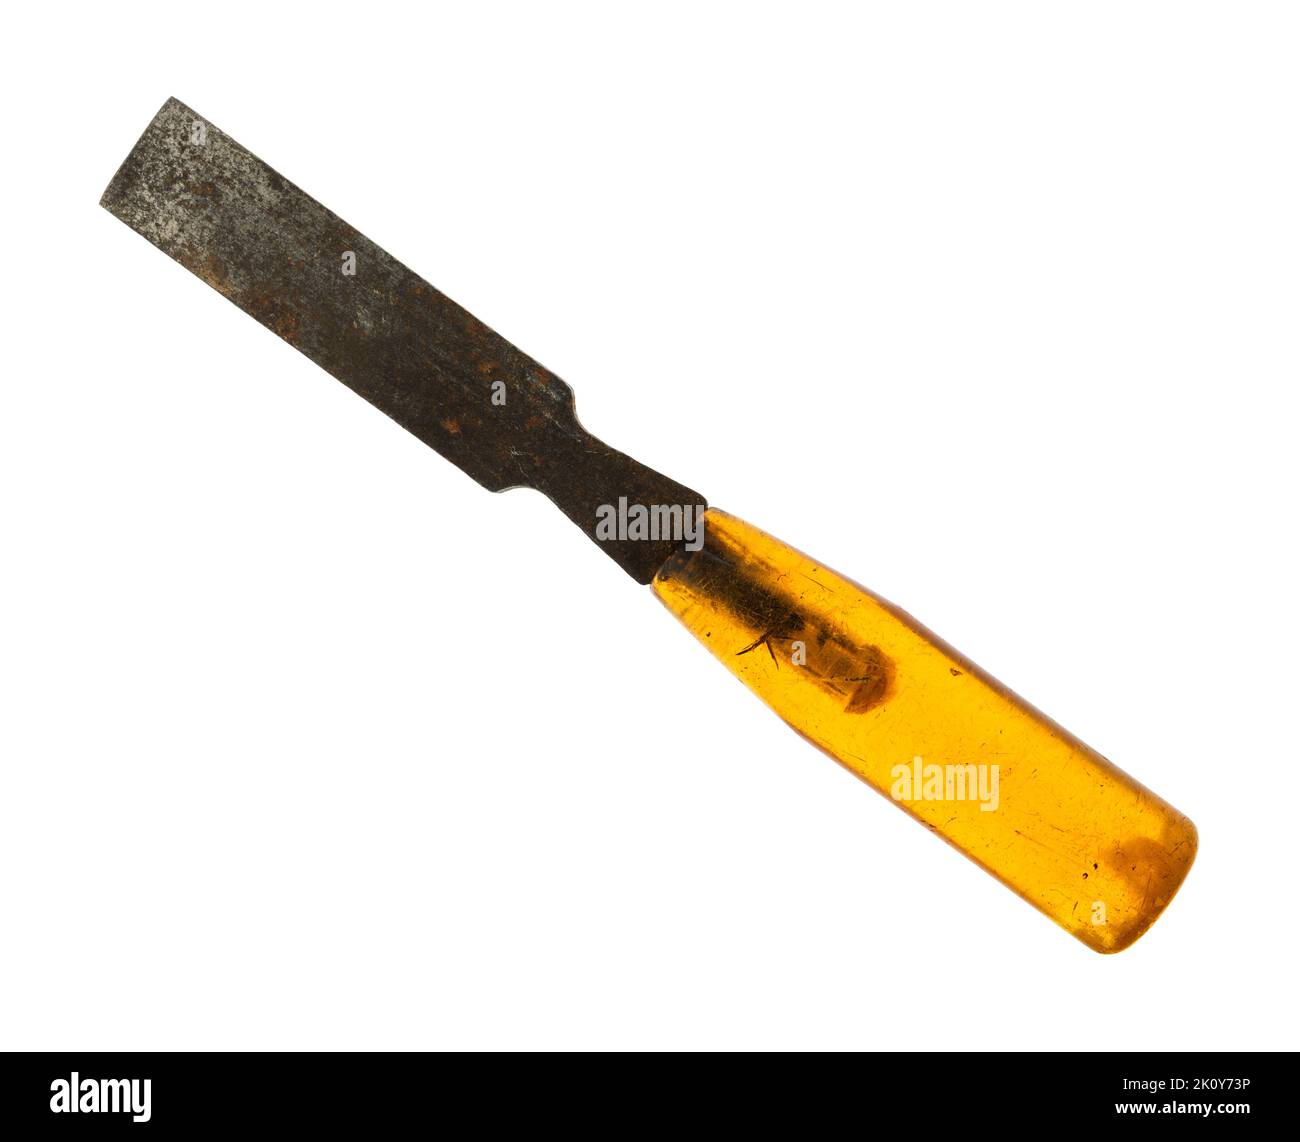 Old used and rusted wood chisel with a translucent handle isolated on a white background. Stock Photo